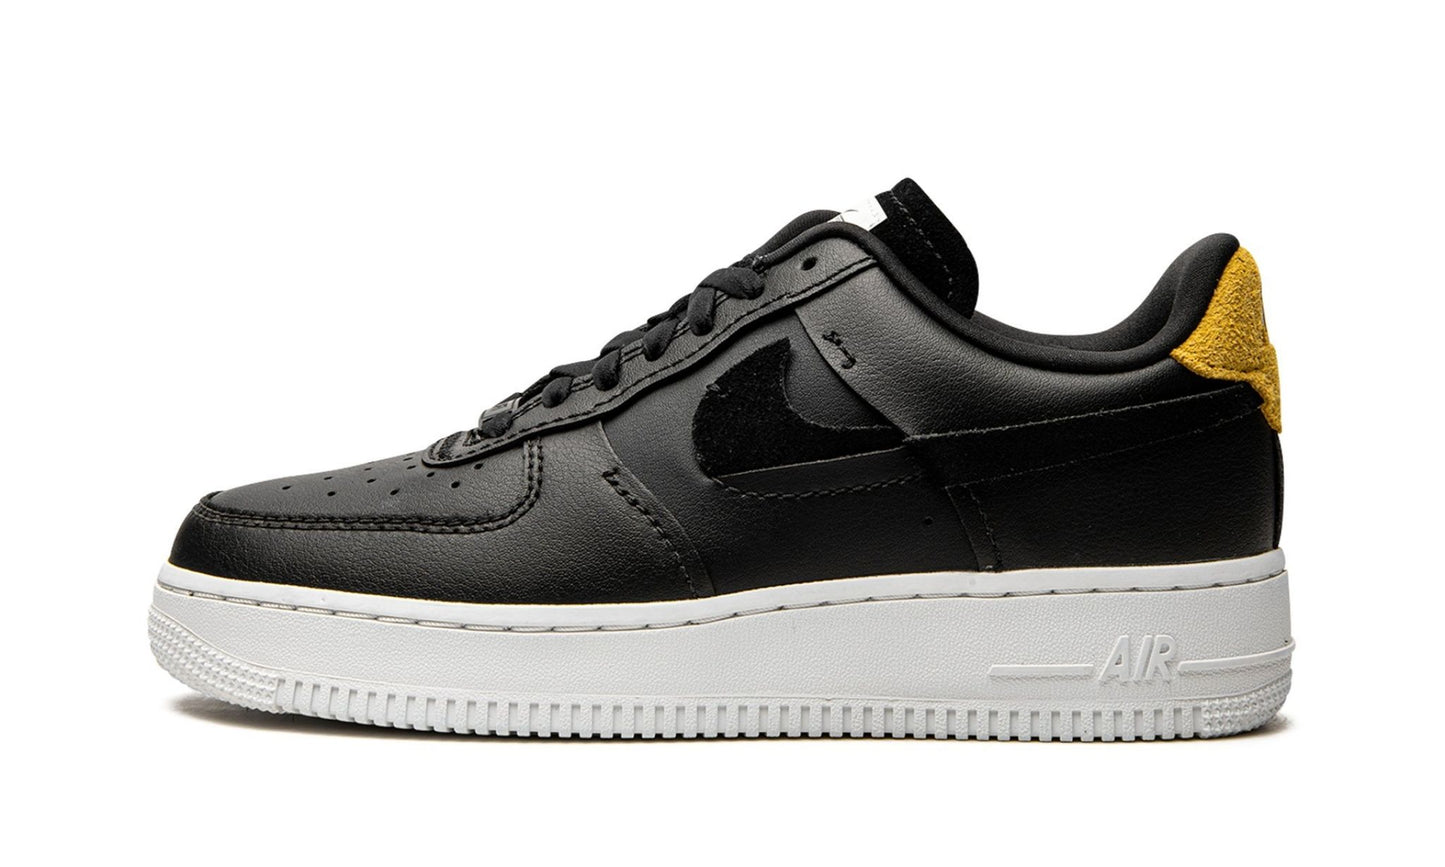 Air Force 1 '07 Low LX "Inside Out"